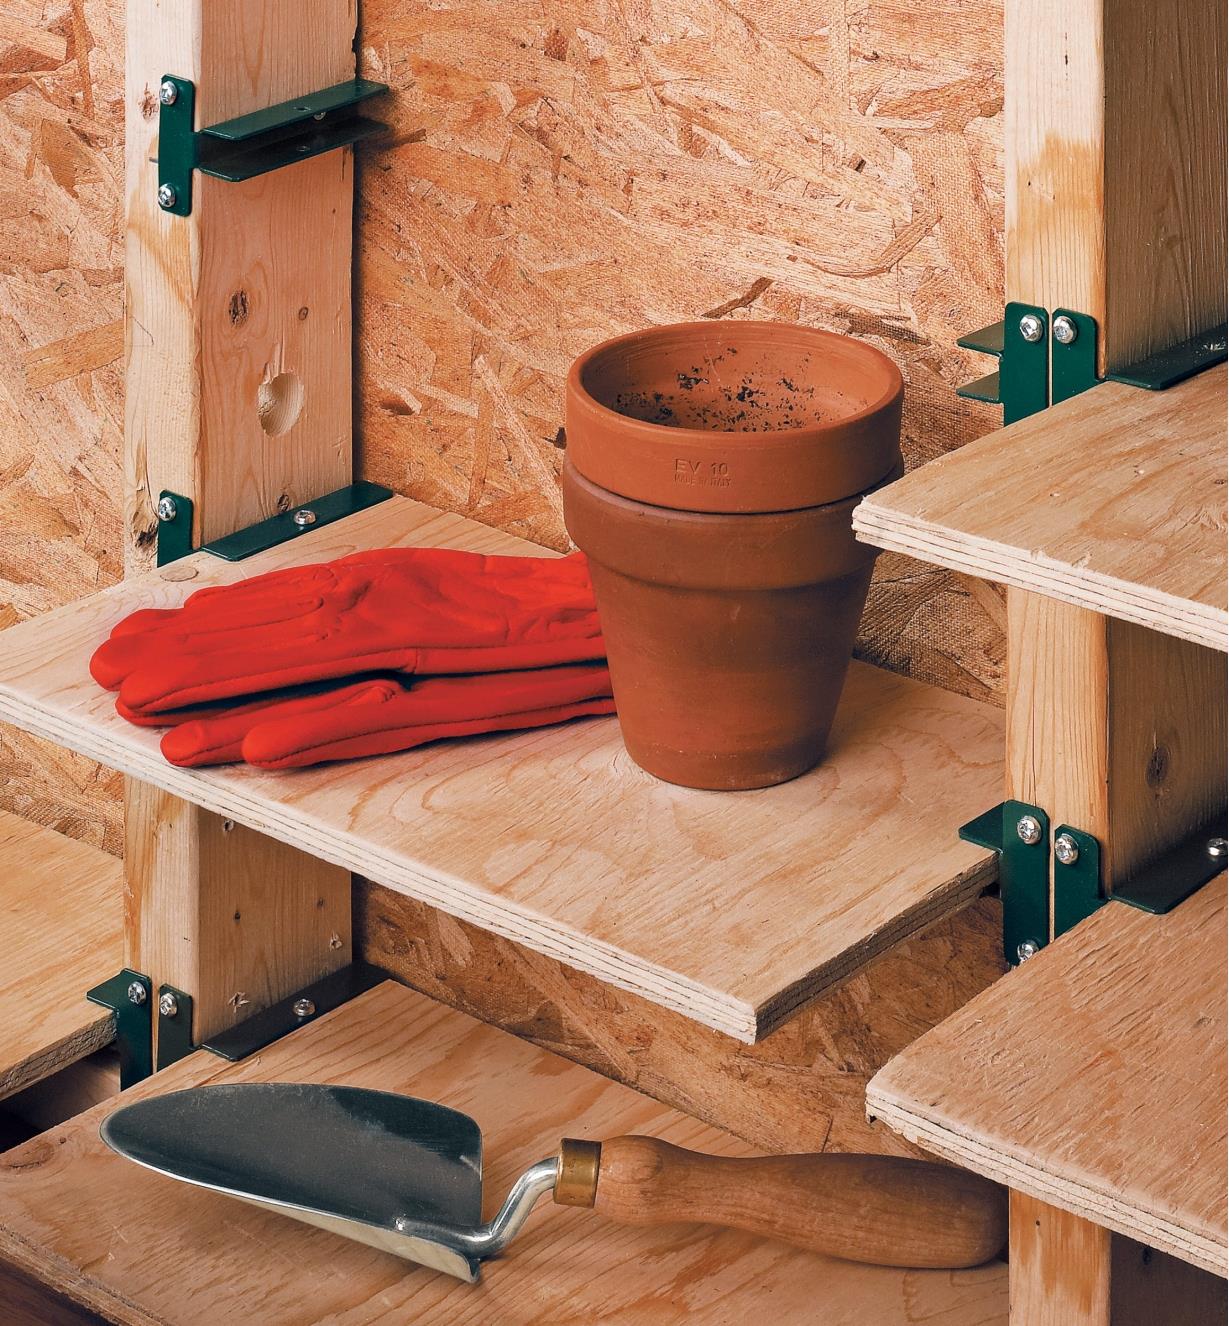 Shelf brackets used to make shelves between wall studs for holding gardening supplies